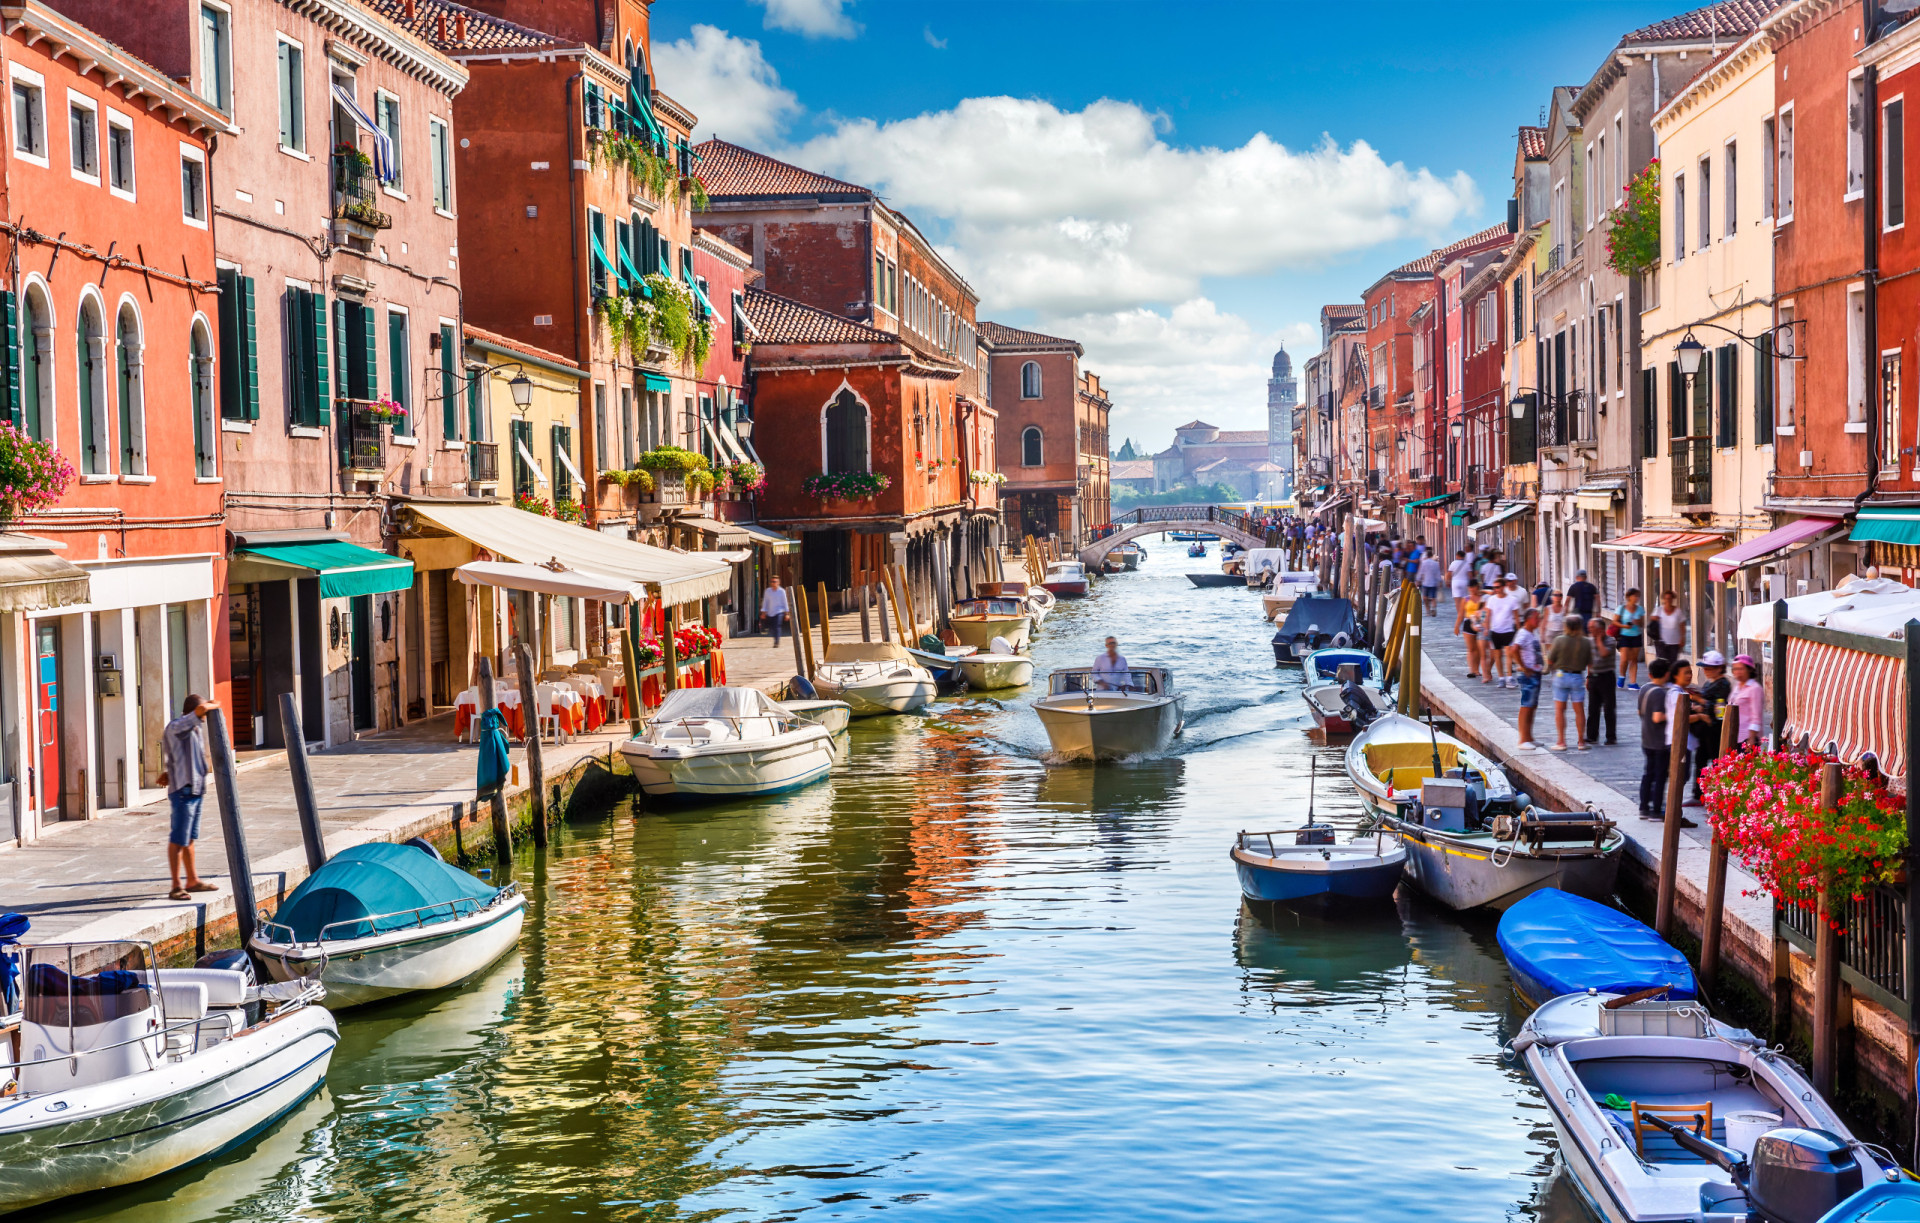 <p>To combat overcrowding and its effects on the city’s infrastructure and environment, Venice is implementing tourist quotas. This initiative seeks to maintain the city's historical charm and ecological balance, ensuring its survival as a unique world heritage site.</p><p>You may also like:<a href="https://www.starsinsider.com/n/489502?utm_source=msn.com&utm_medium=display&utm_campaign=referral_description&utm_content=646906en-us"> The most impressive horns and antlers in the animal kingdom</a></p>